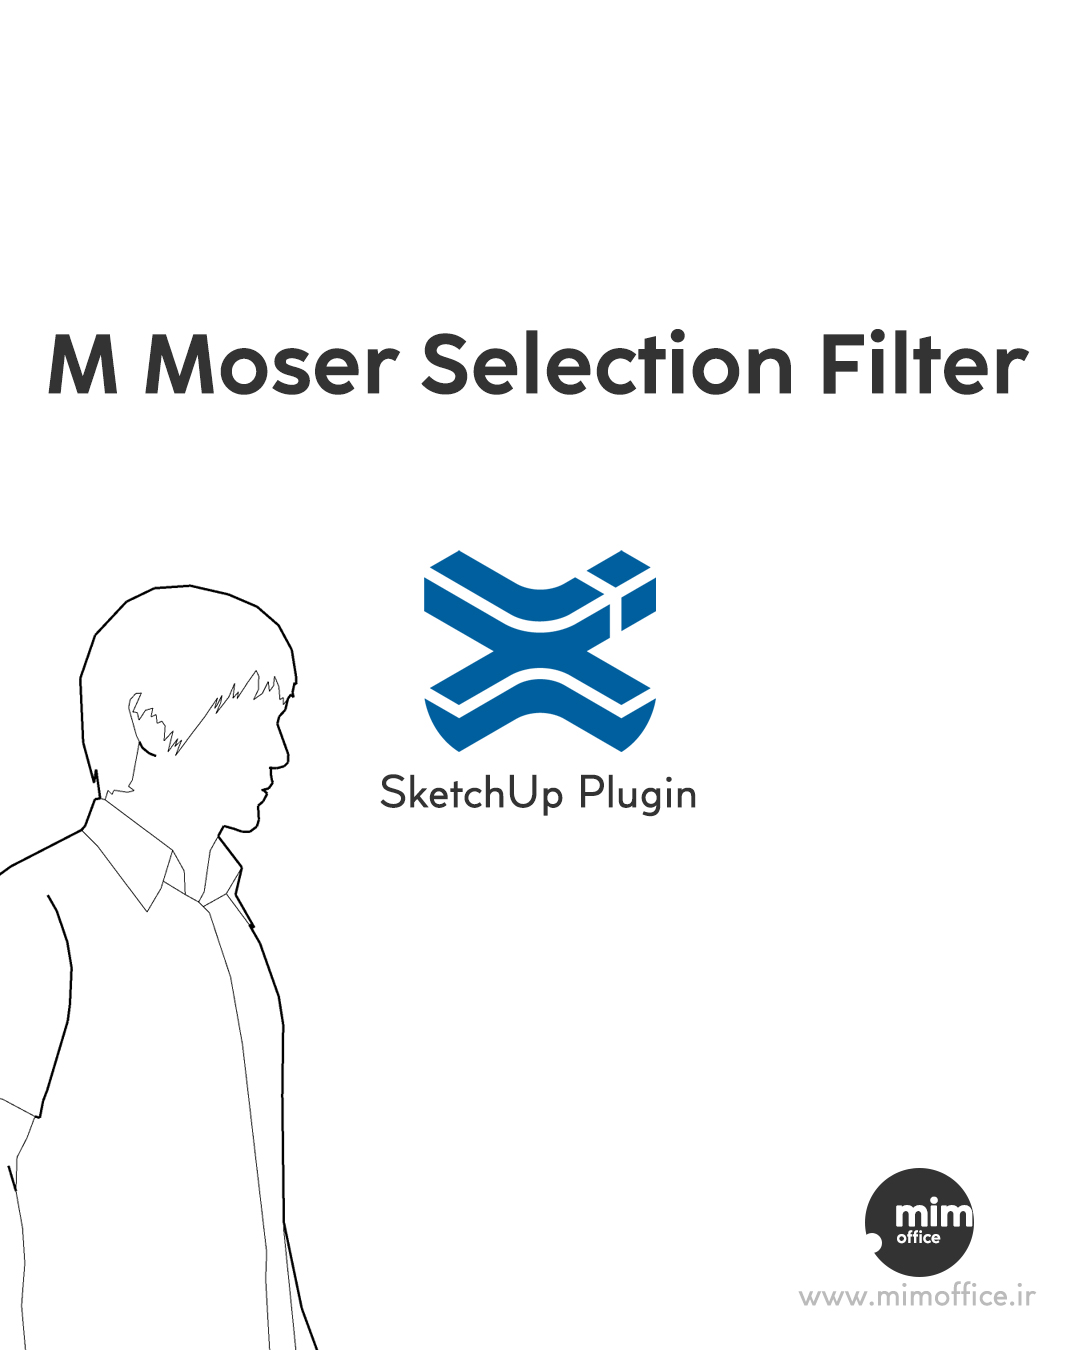 M Moser Selection Filter